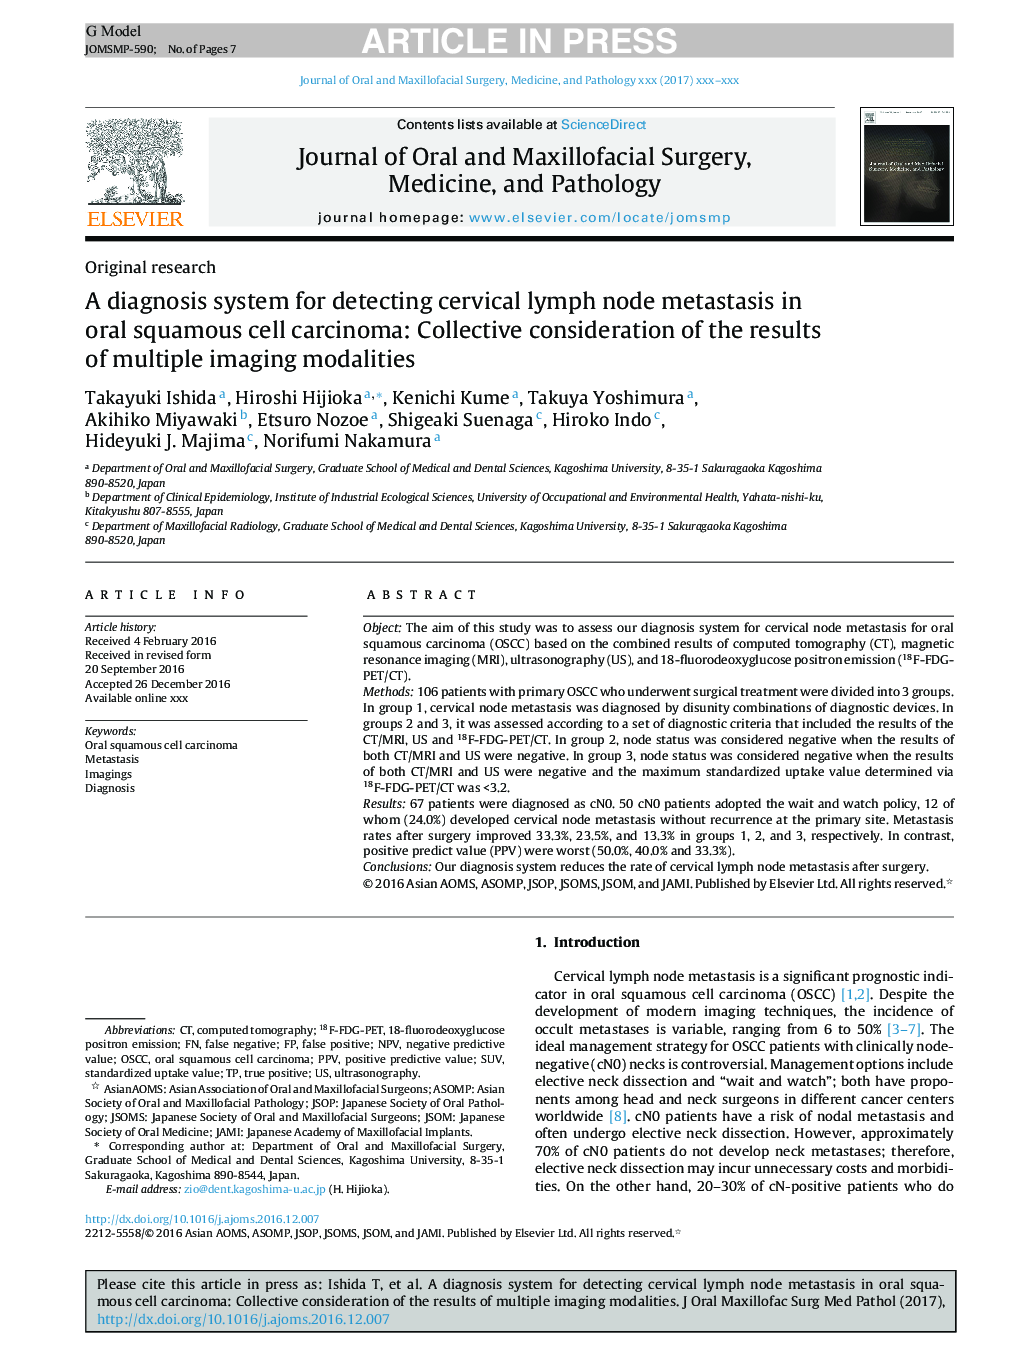 A diagnosis system for detecting cervical lymph node metastasis in oral squamous cell carcinoma: Collective consideration of the results of multiple imaging modalities